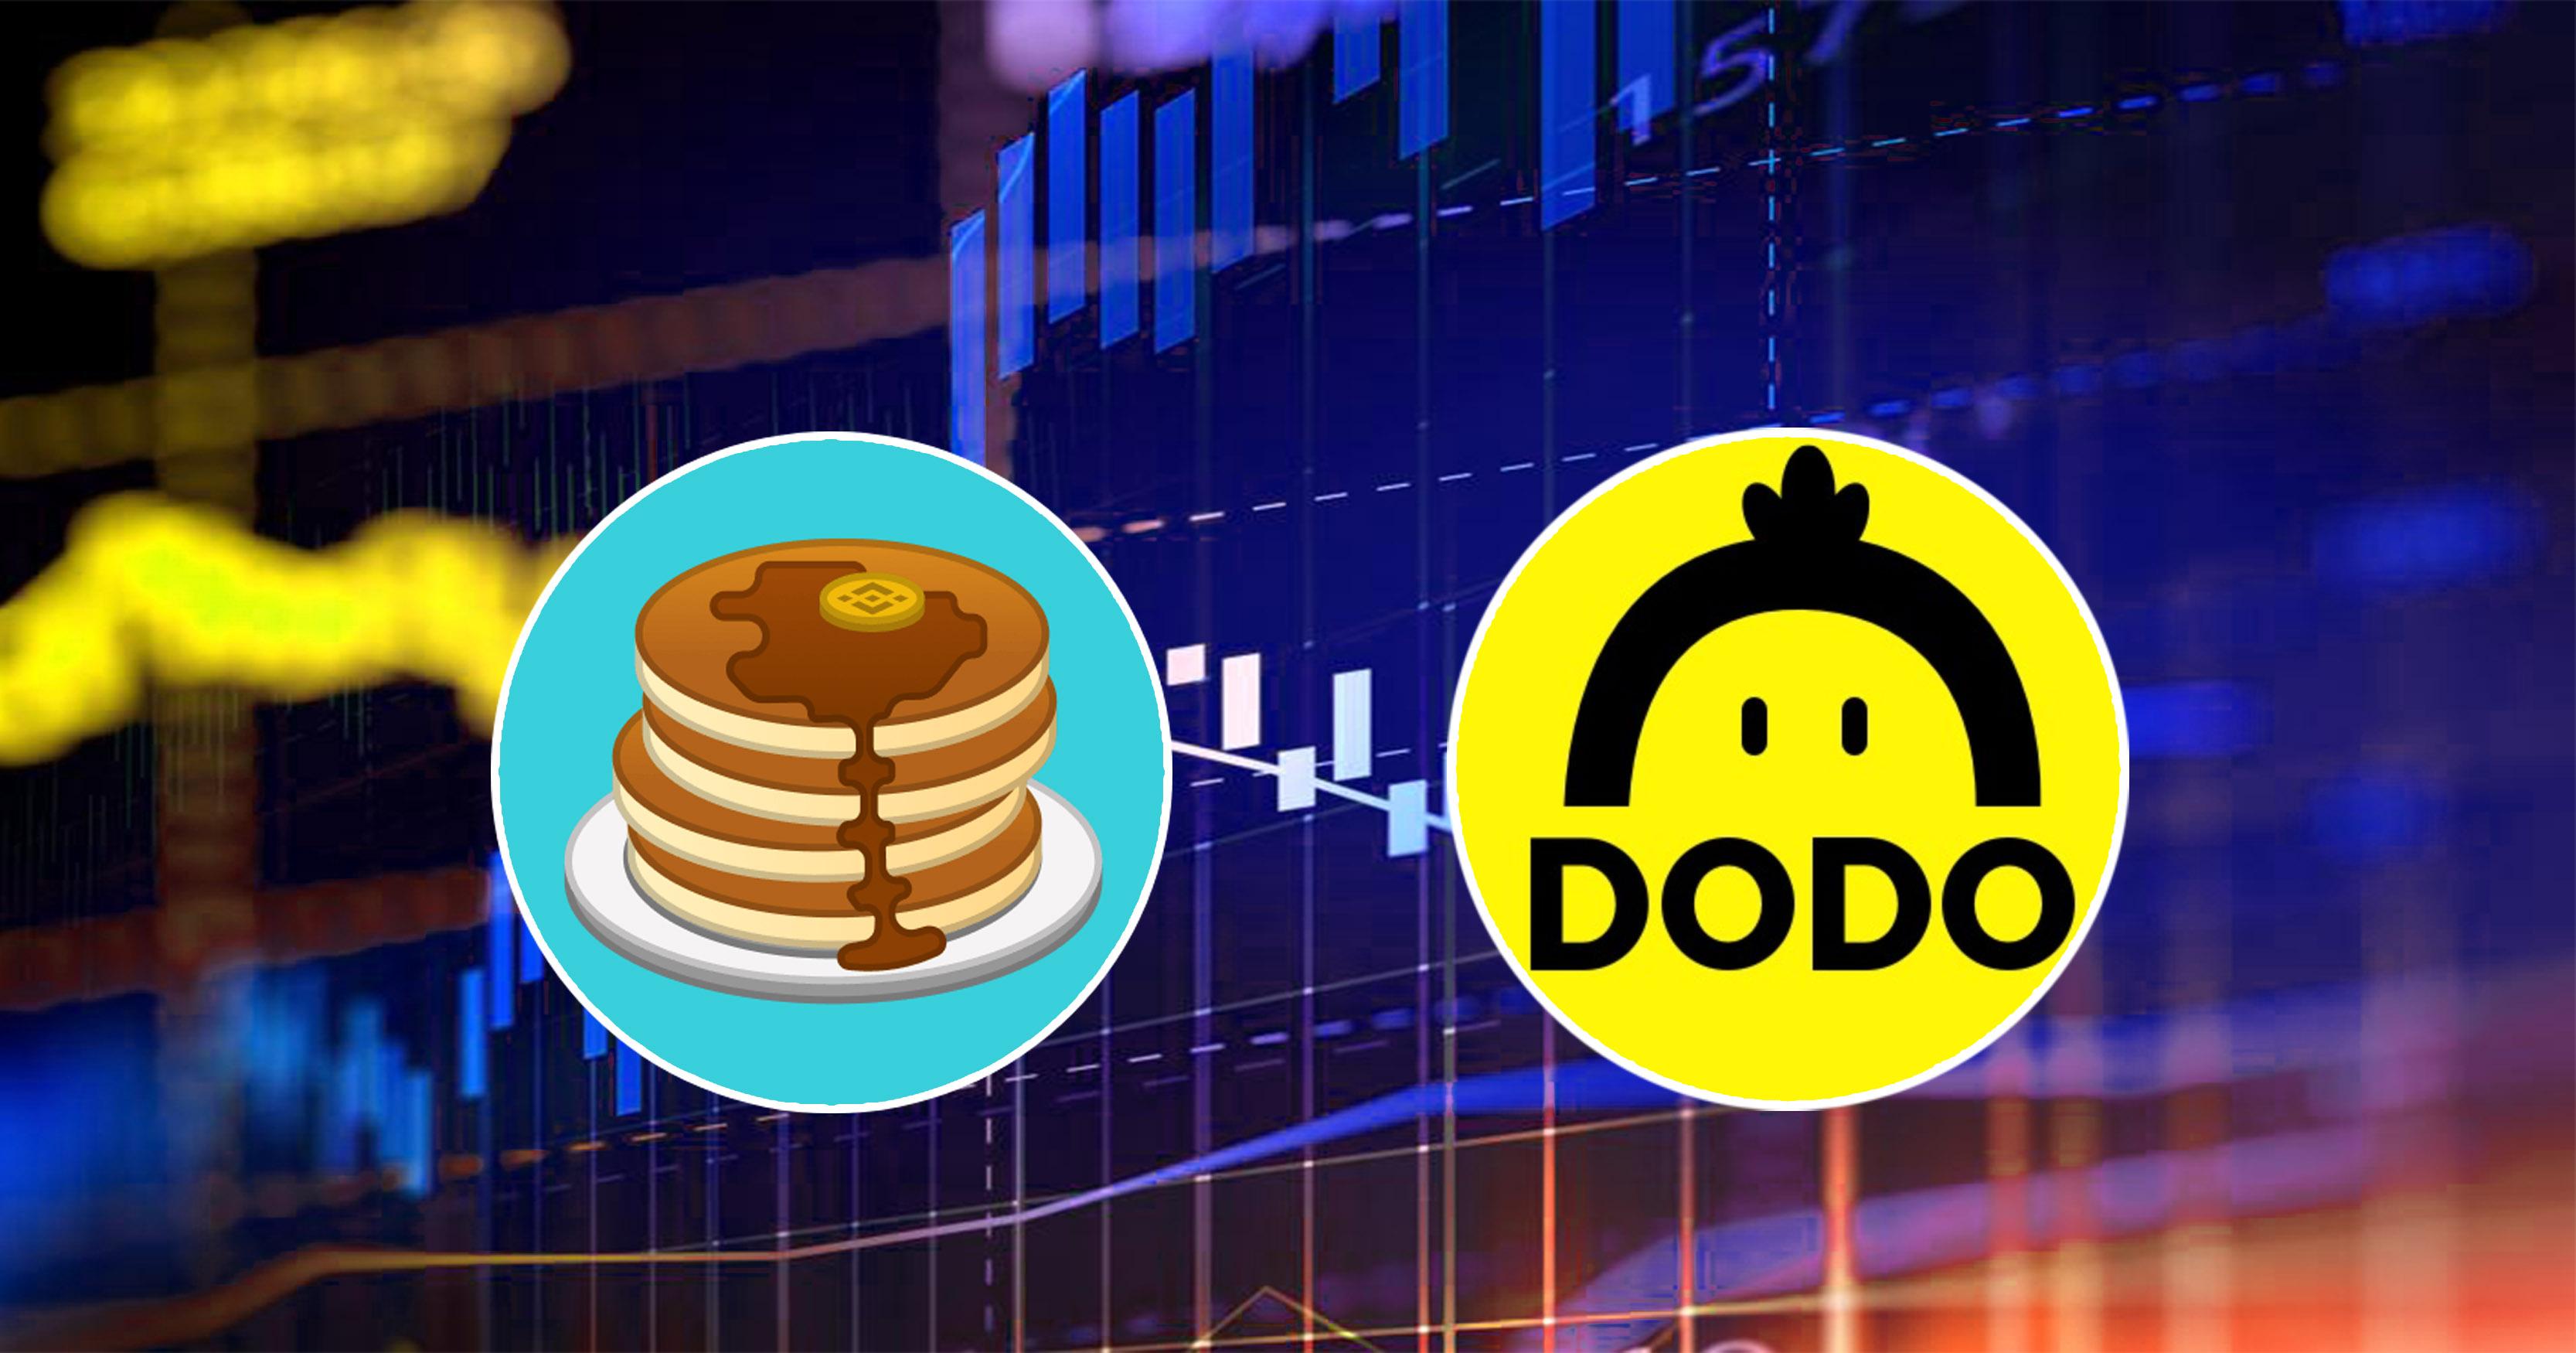 PancakeSwap (CAKE) and DODOEx (DODO) Technical Analysis: What to Expect?